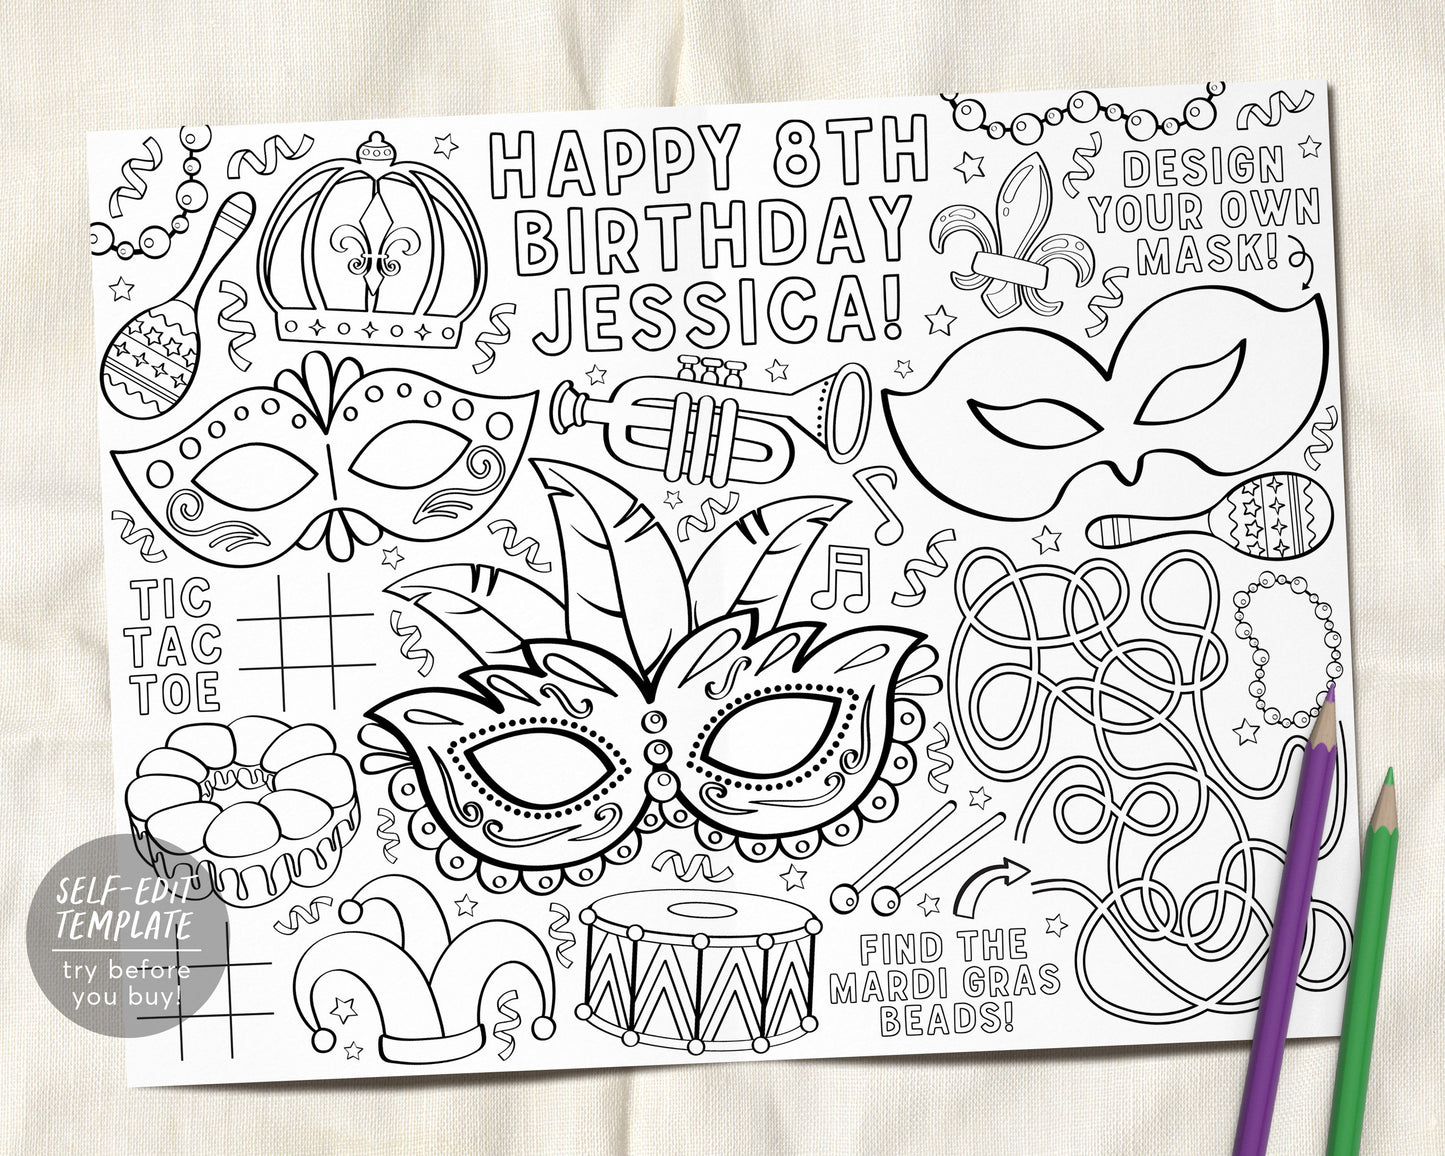 Mardi Gras Coloring Placemat For Kids Editable Template, Masquerade Ball Carnival Birthday Party Coloring Page Sheet Table Mat Activity